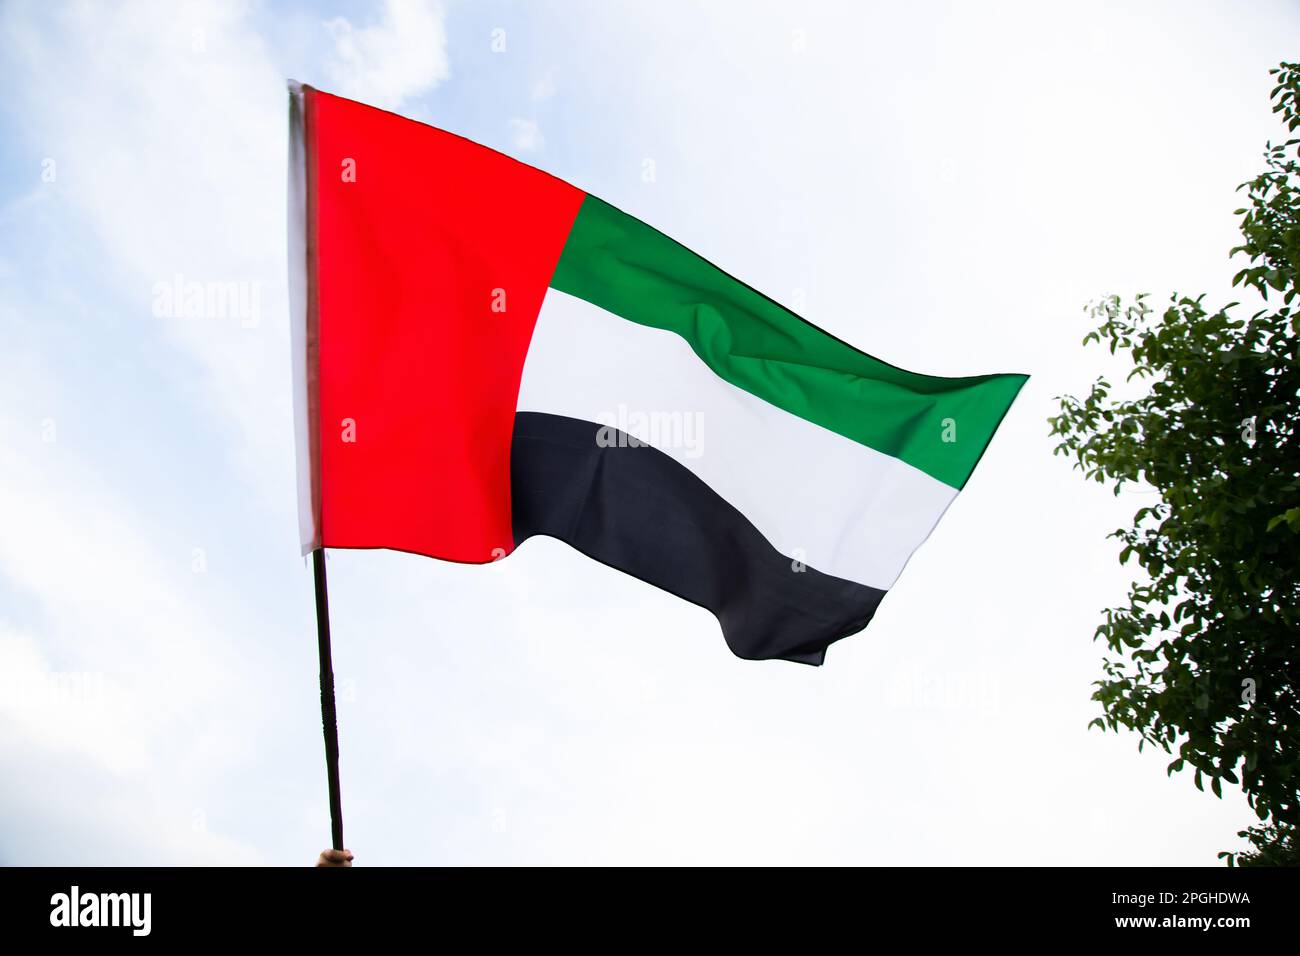 United Arab Emirates flag flying against clean and tranquil sky. UAE celebrates it's national day on 2nd December every year. Stock Photo